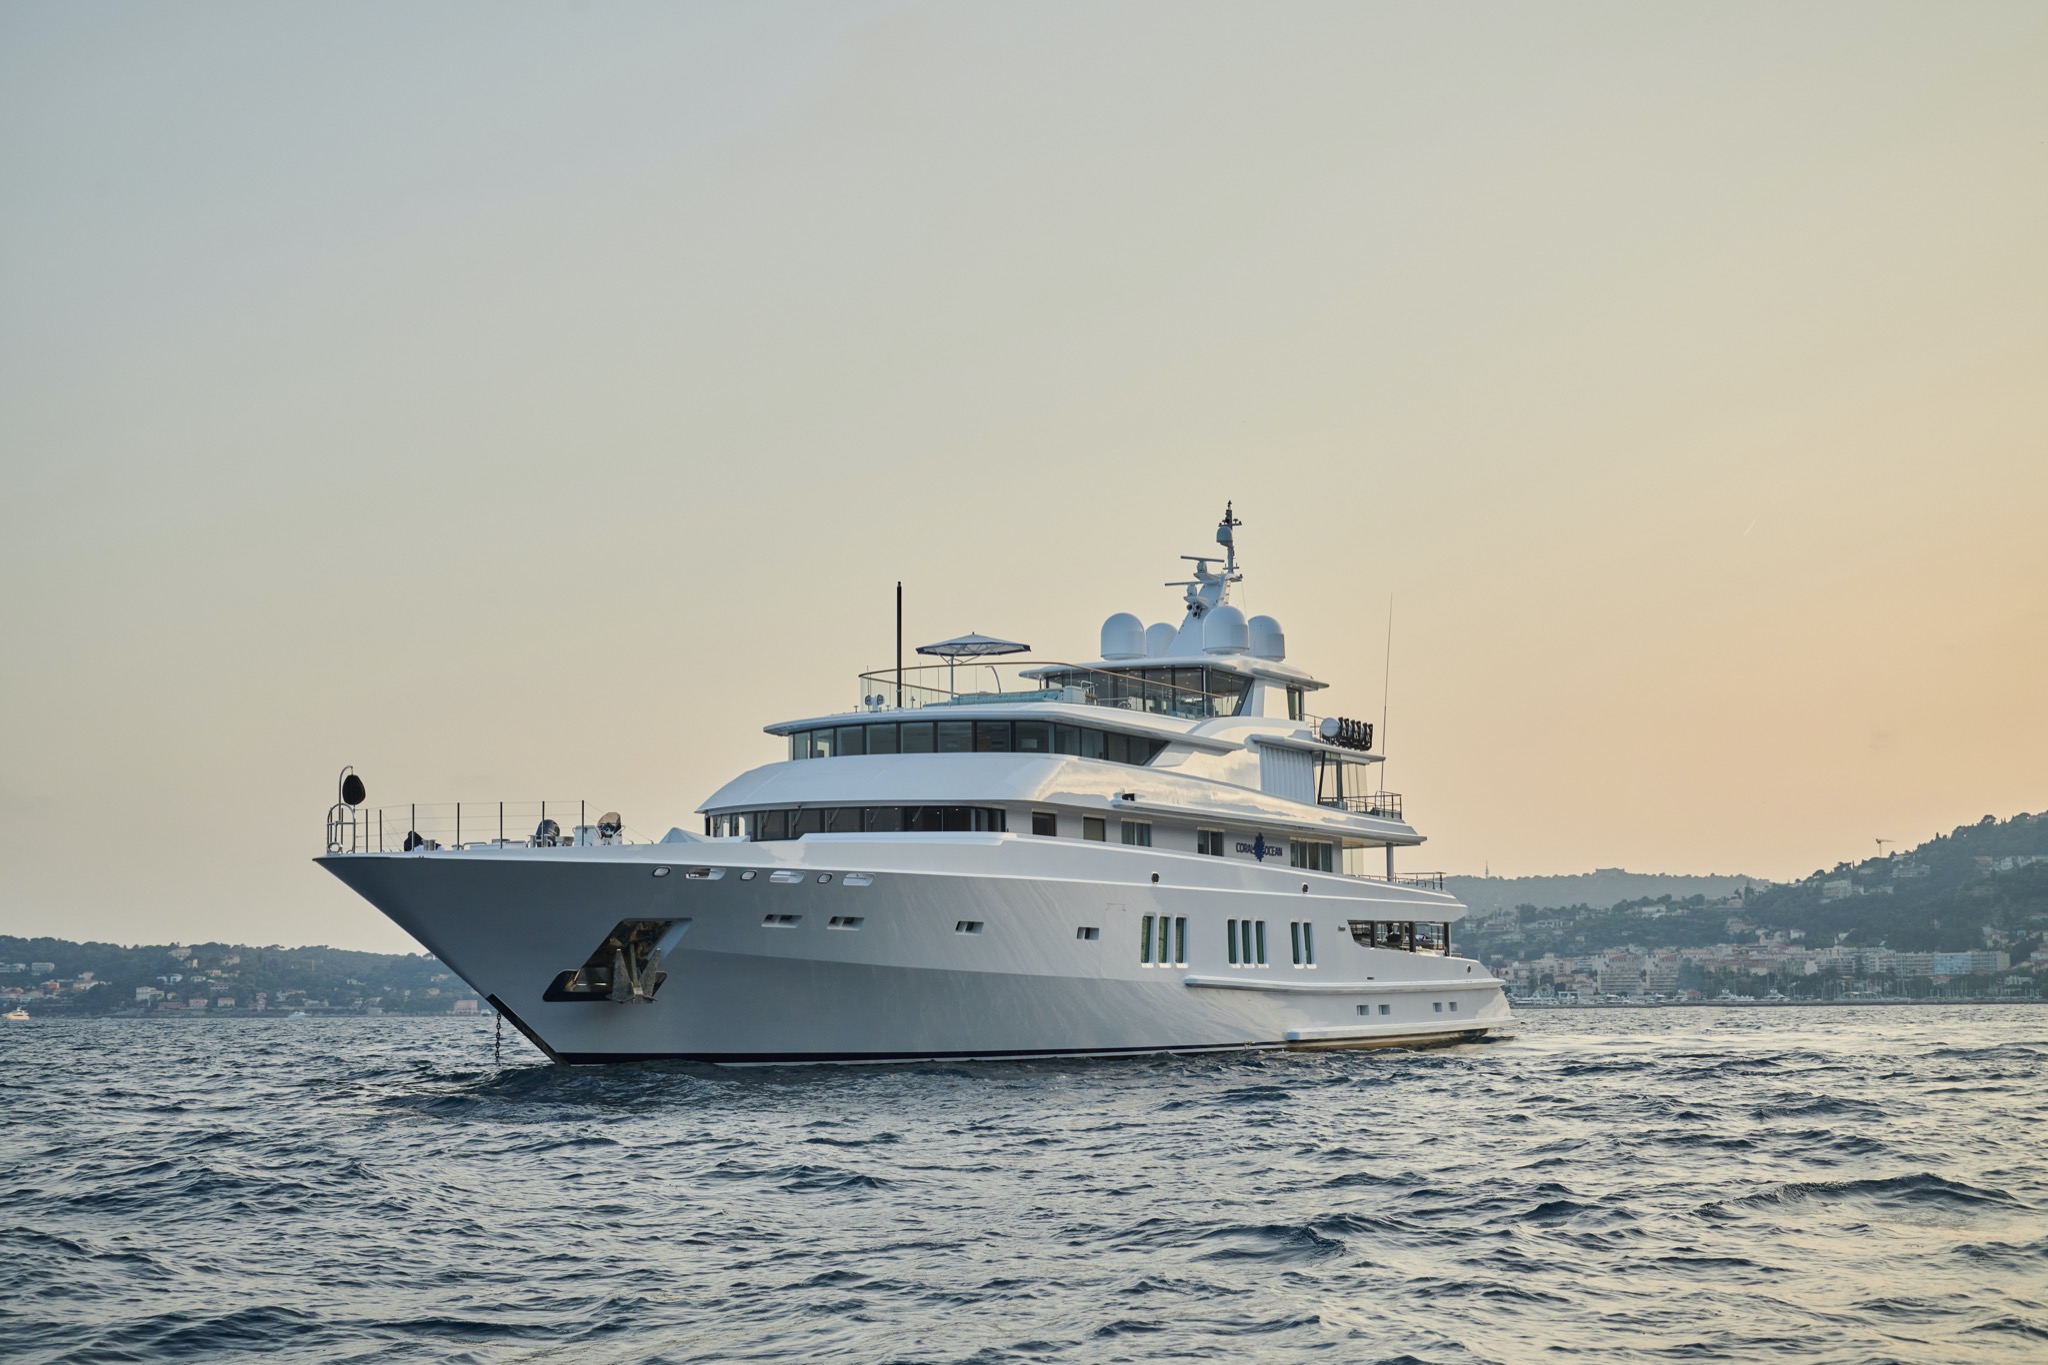 MEET THE MOST ICONIC SUPERYACHT REBORN & READY TO BE CHARTERED